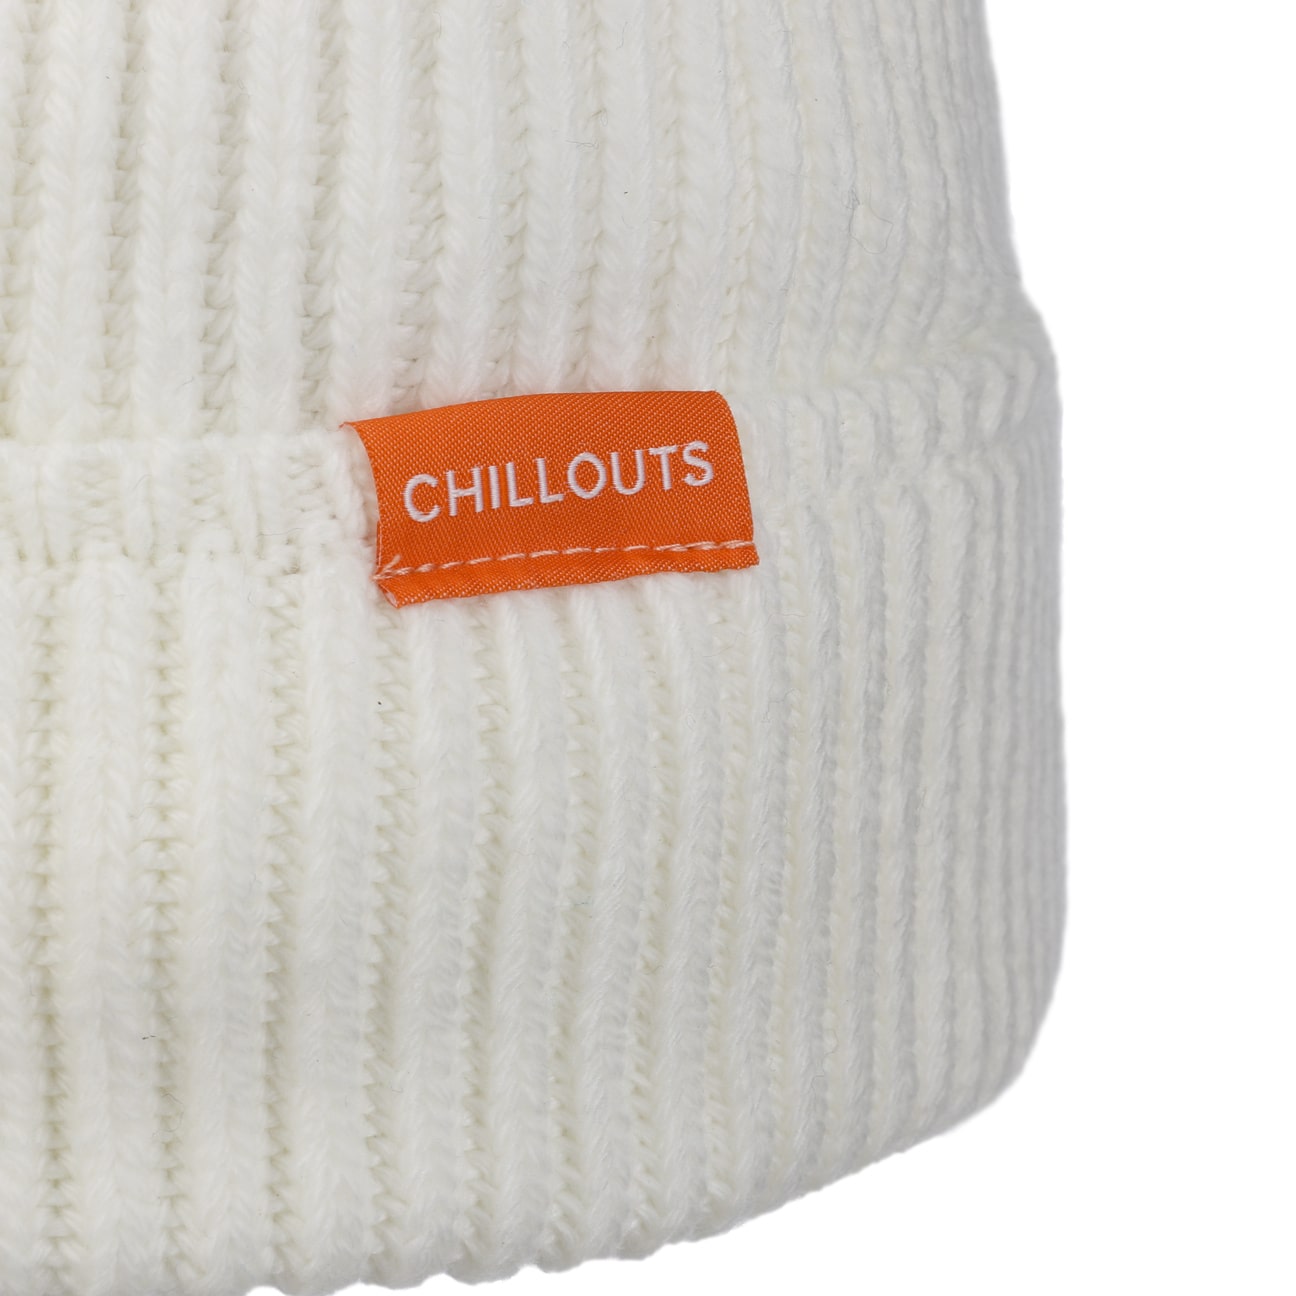 Cotton € by Wool - 29,99 Umschlagmütze Chillouts Meets